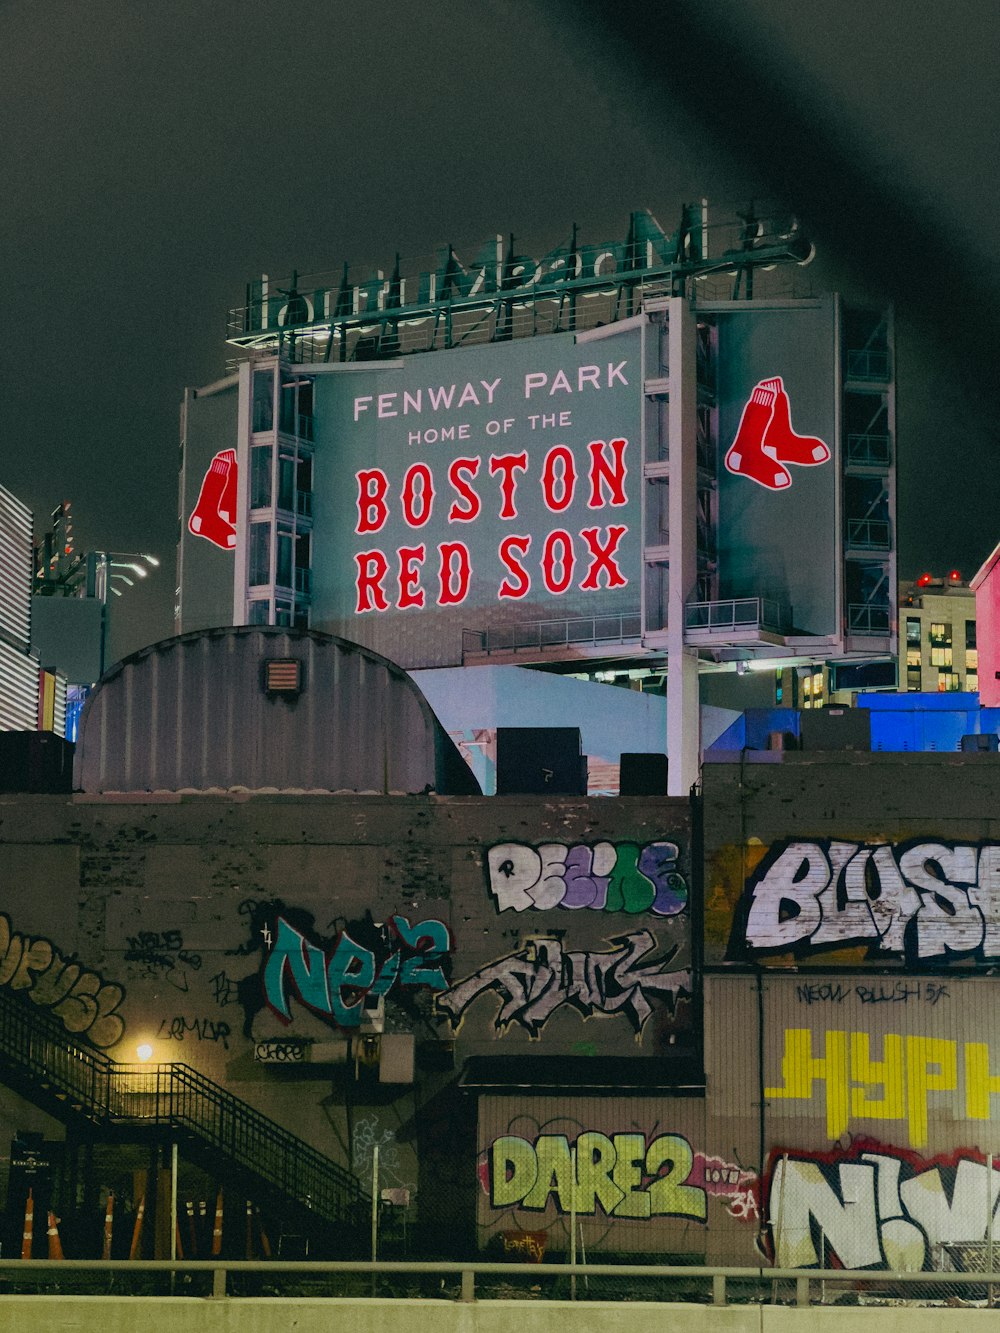 a view of the boston red sox stadium from across the street